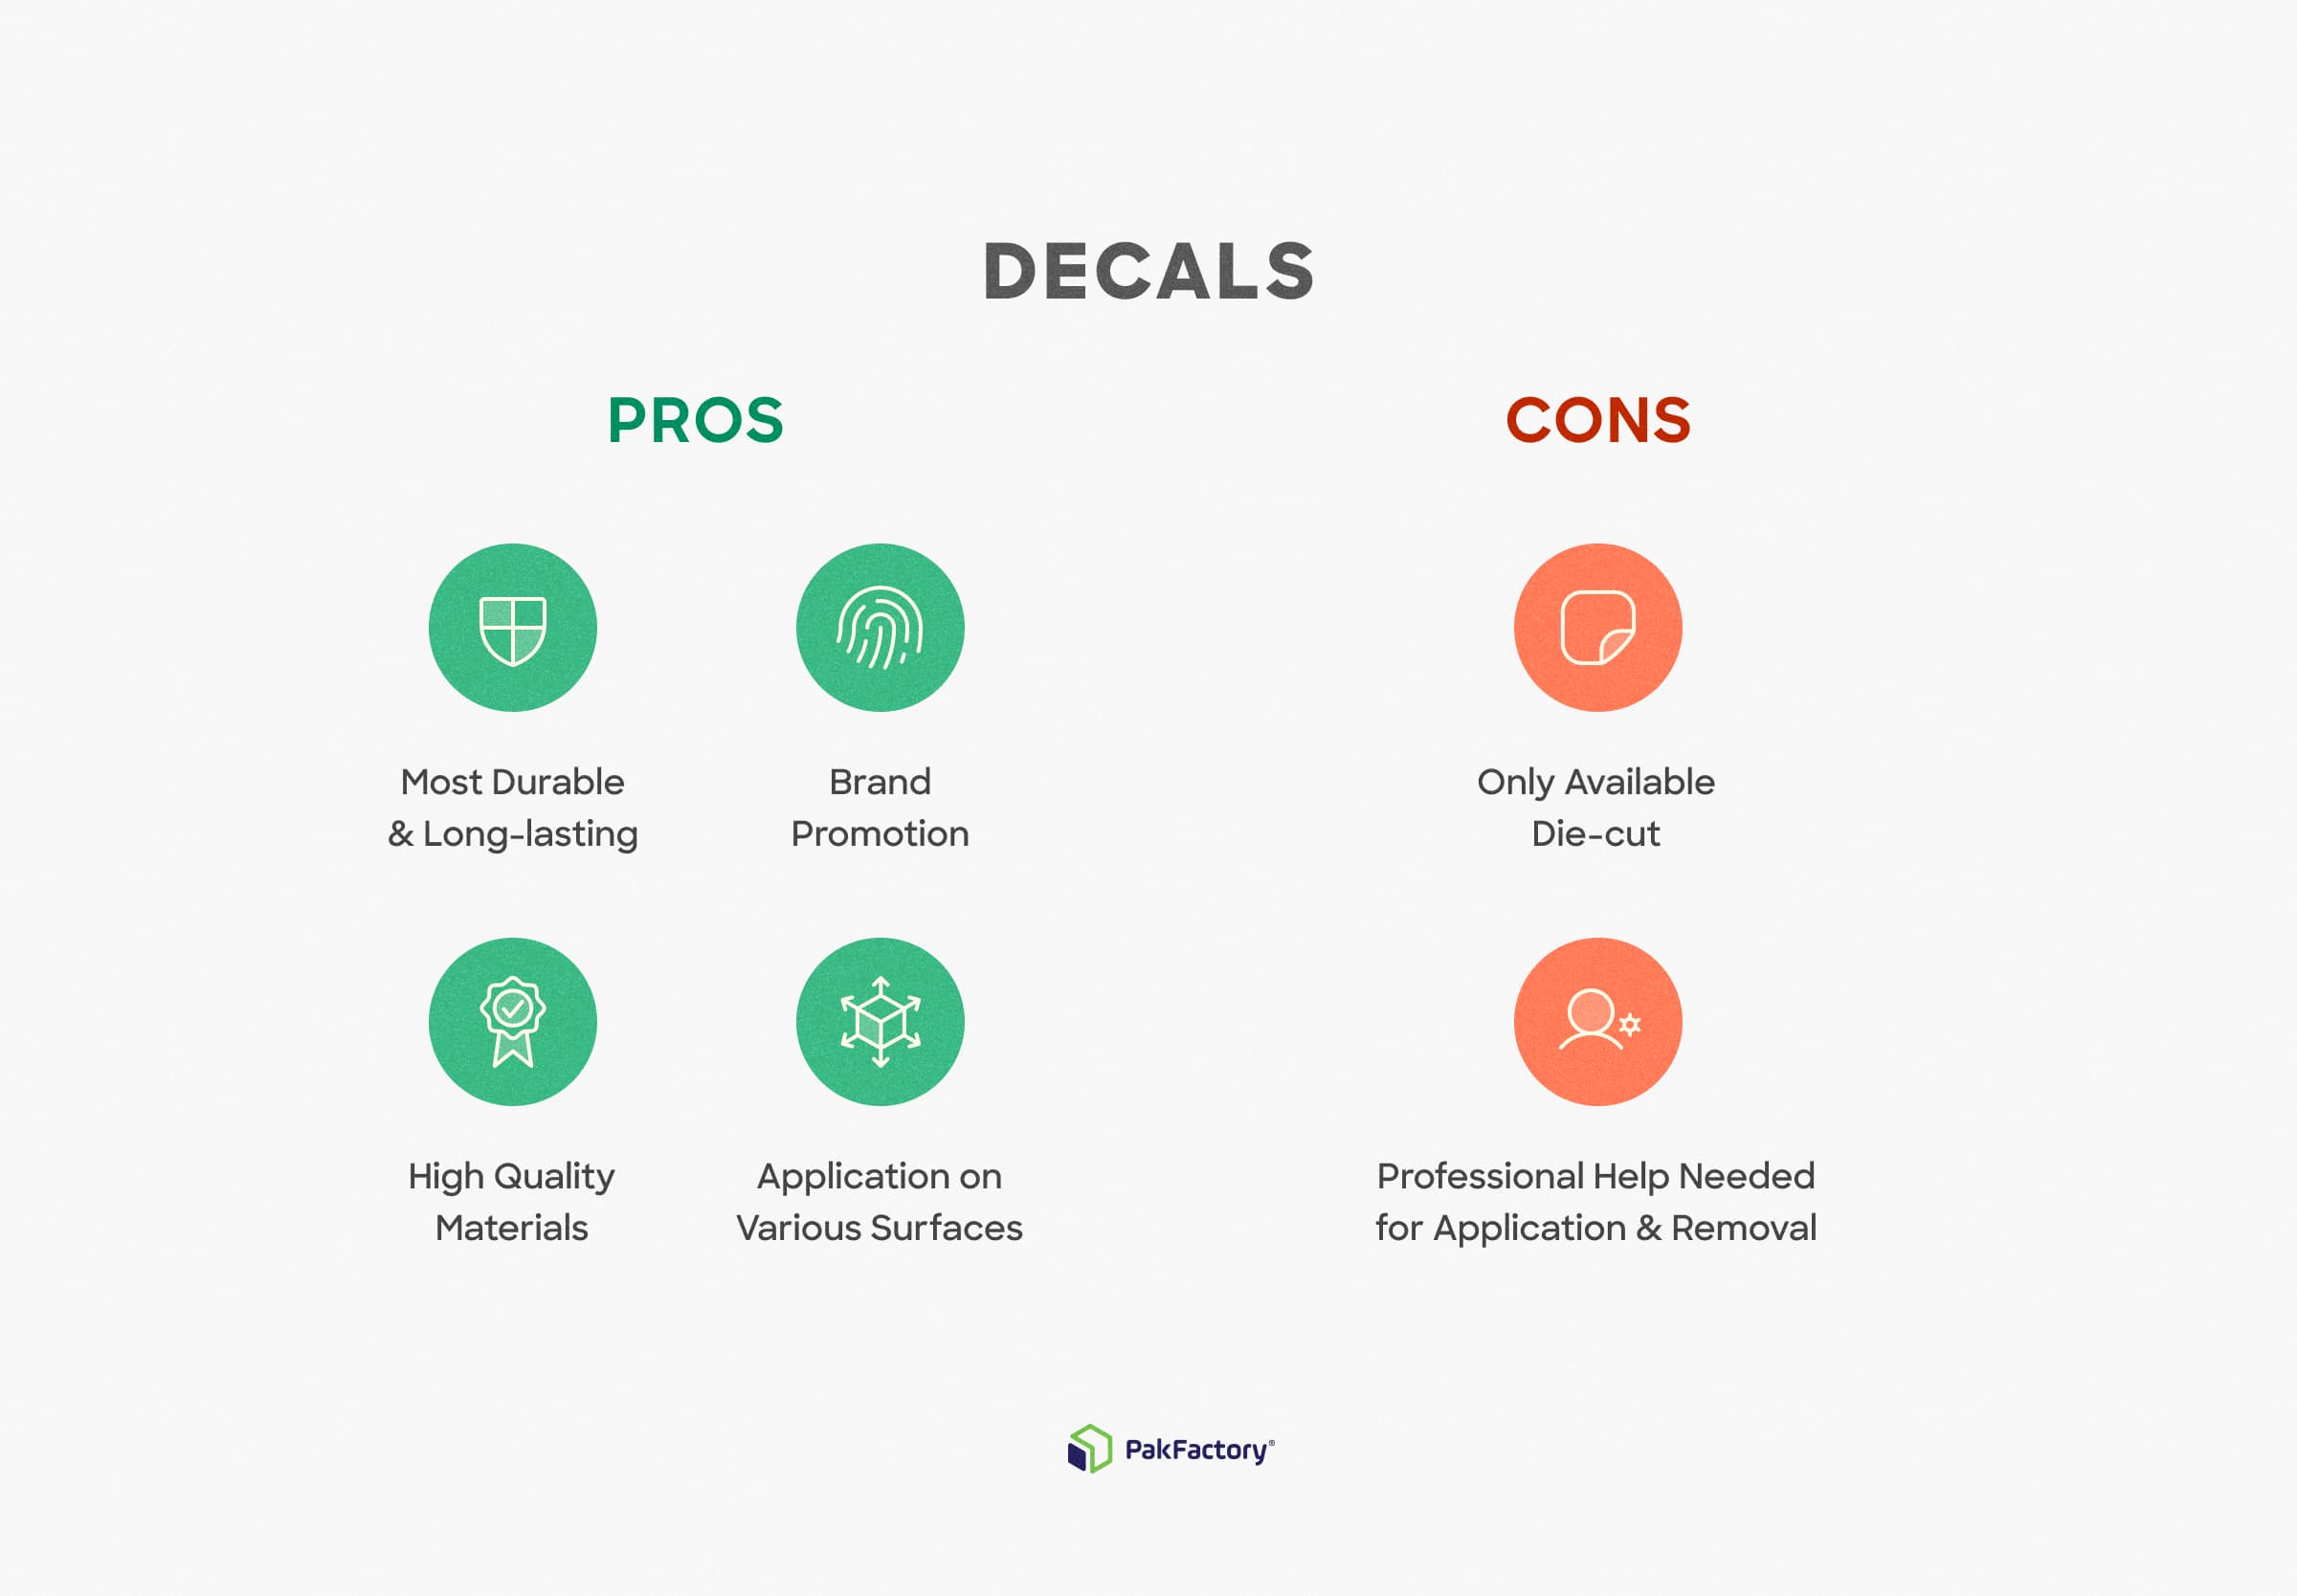 the pros and cons diagram of decals